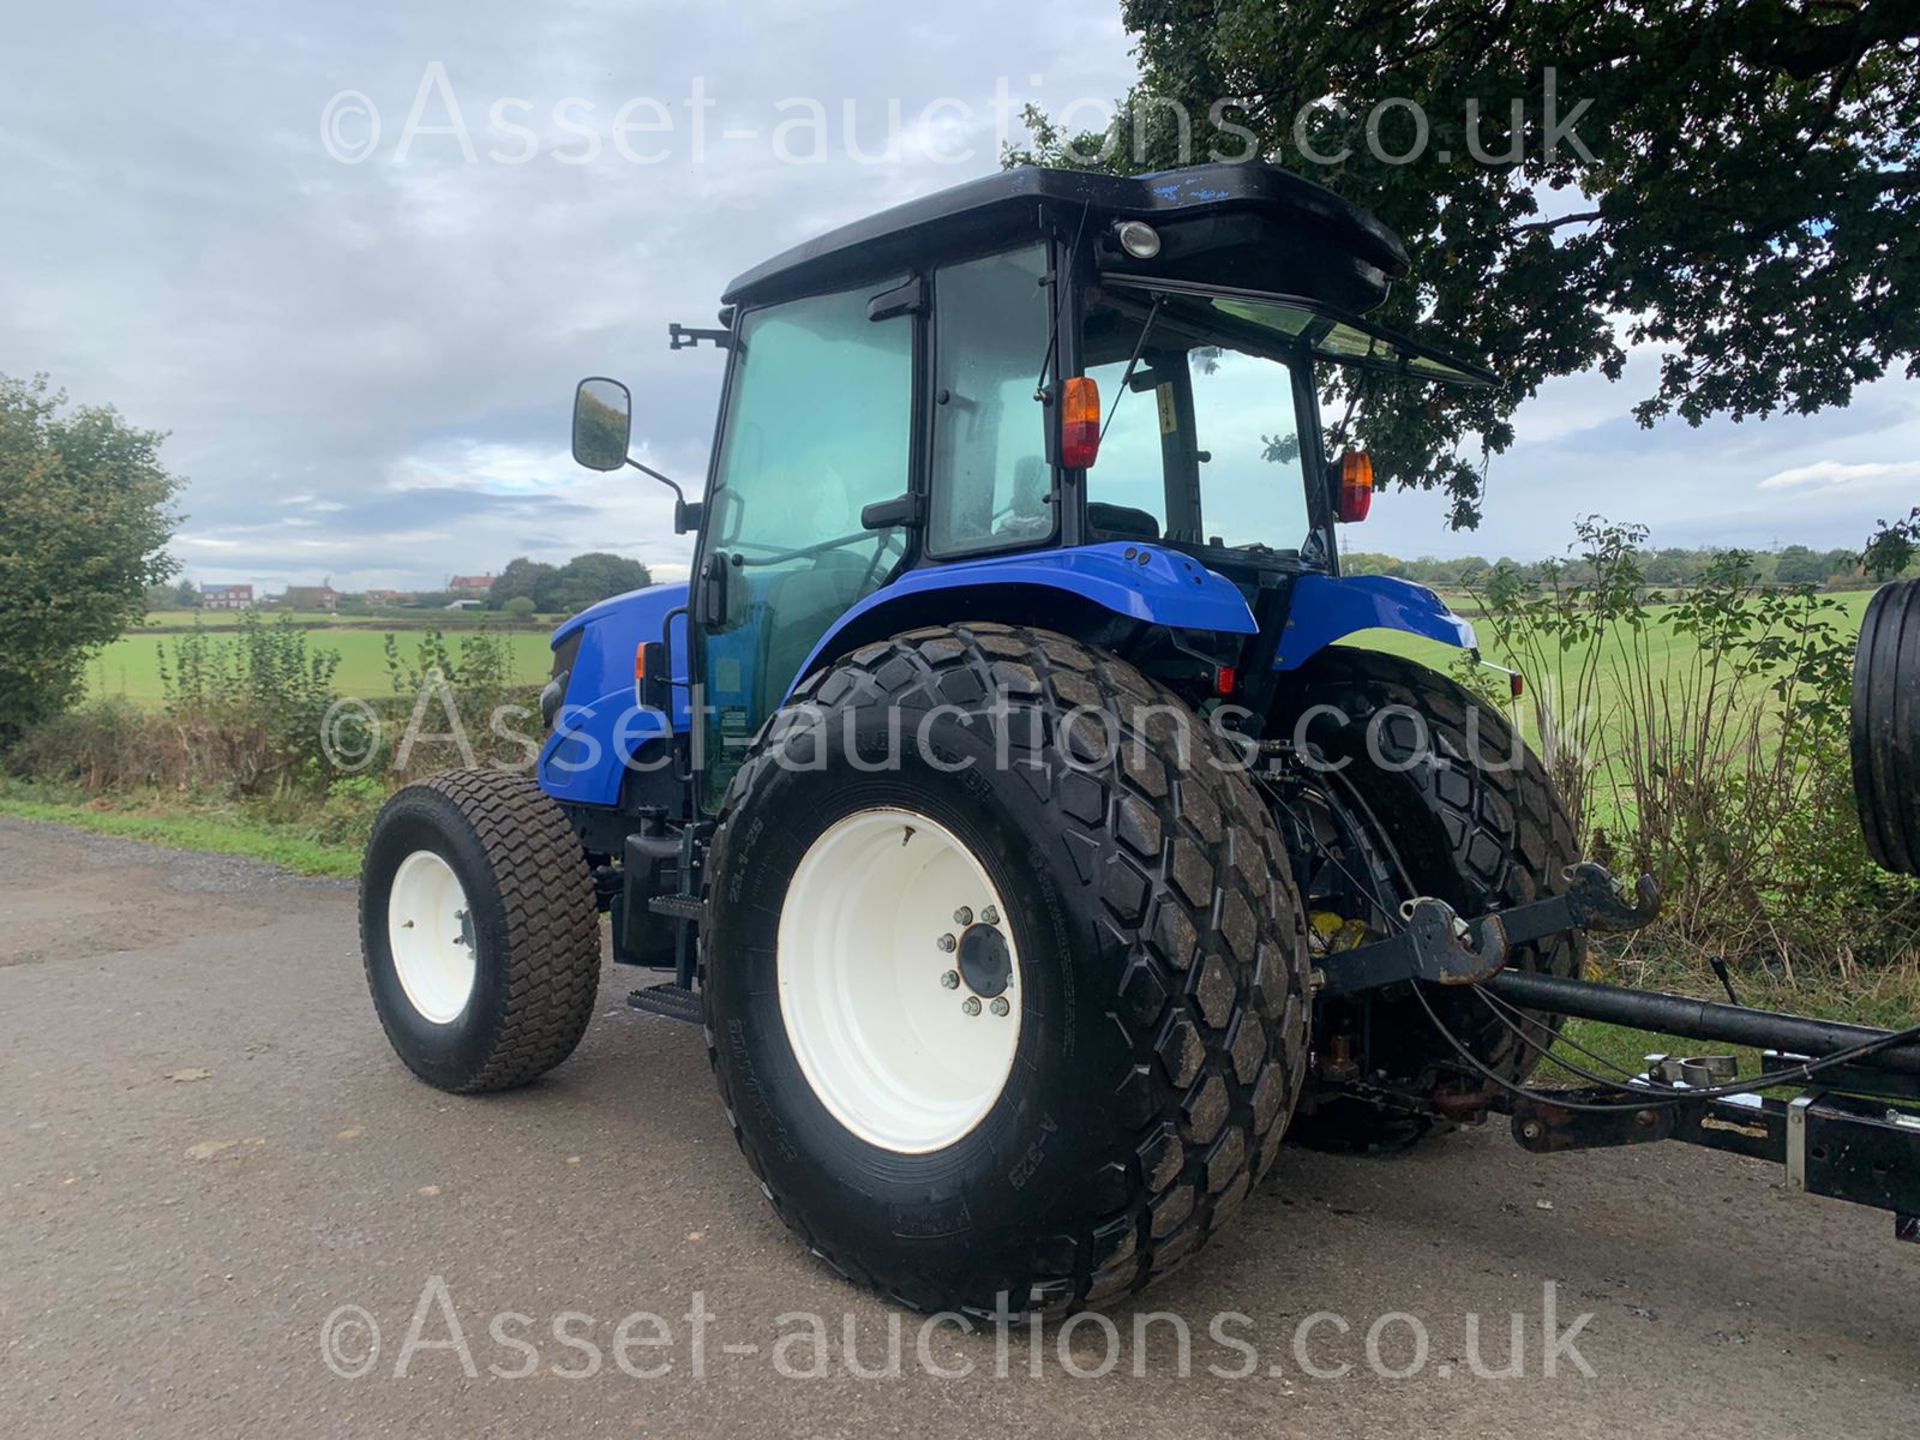 2014 ISEKI TJA8080 86hp 4WD TRACTOR, RUNS DRIVES AND WORKS, SHOWING A LOW AN GENUINE 960 HOURS - Image 3 of 10